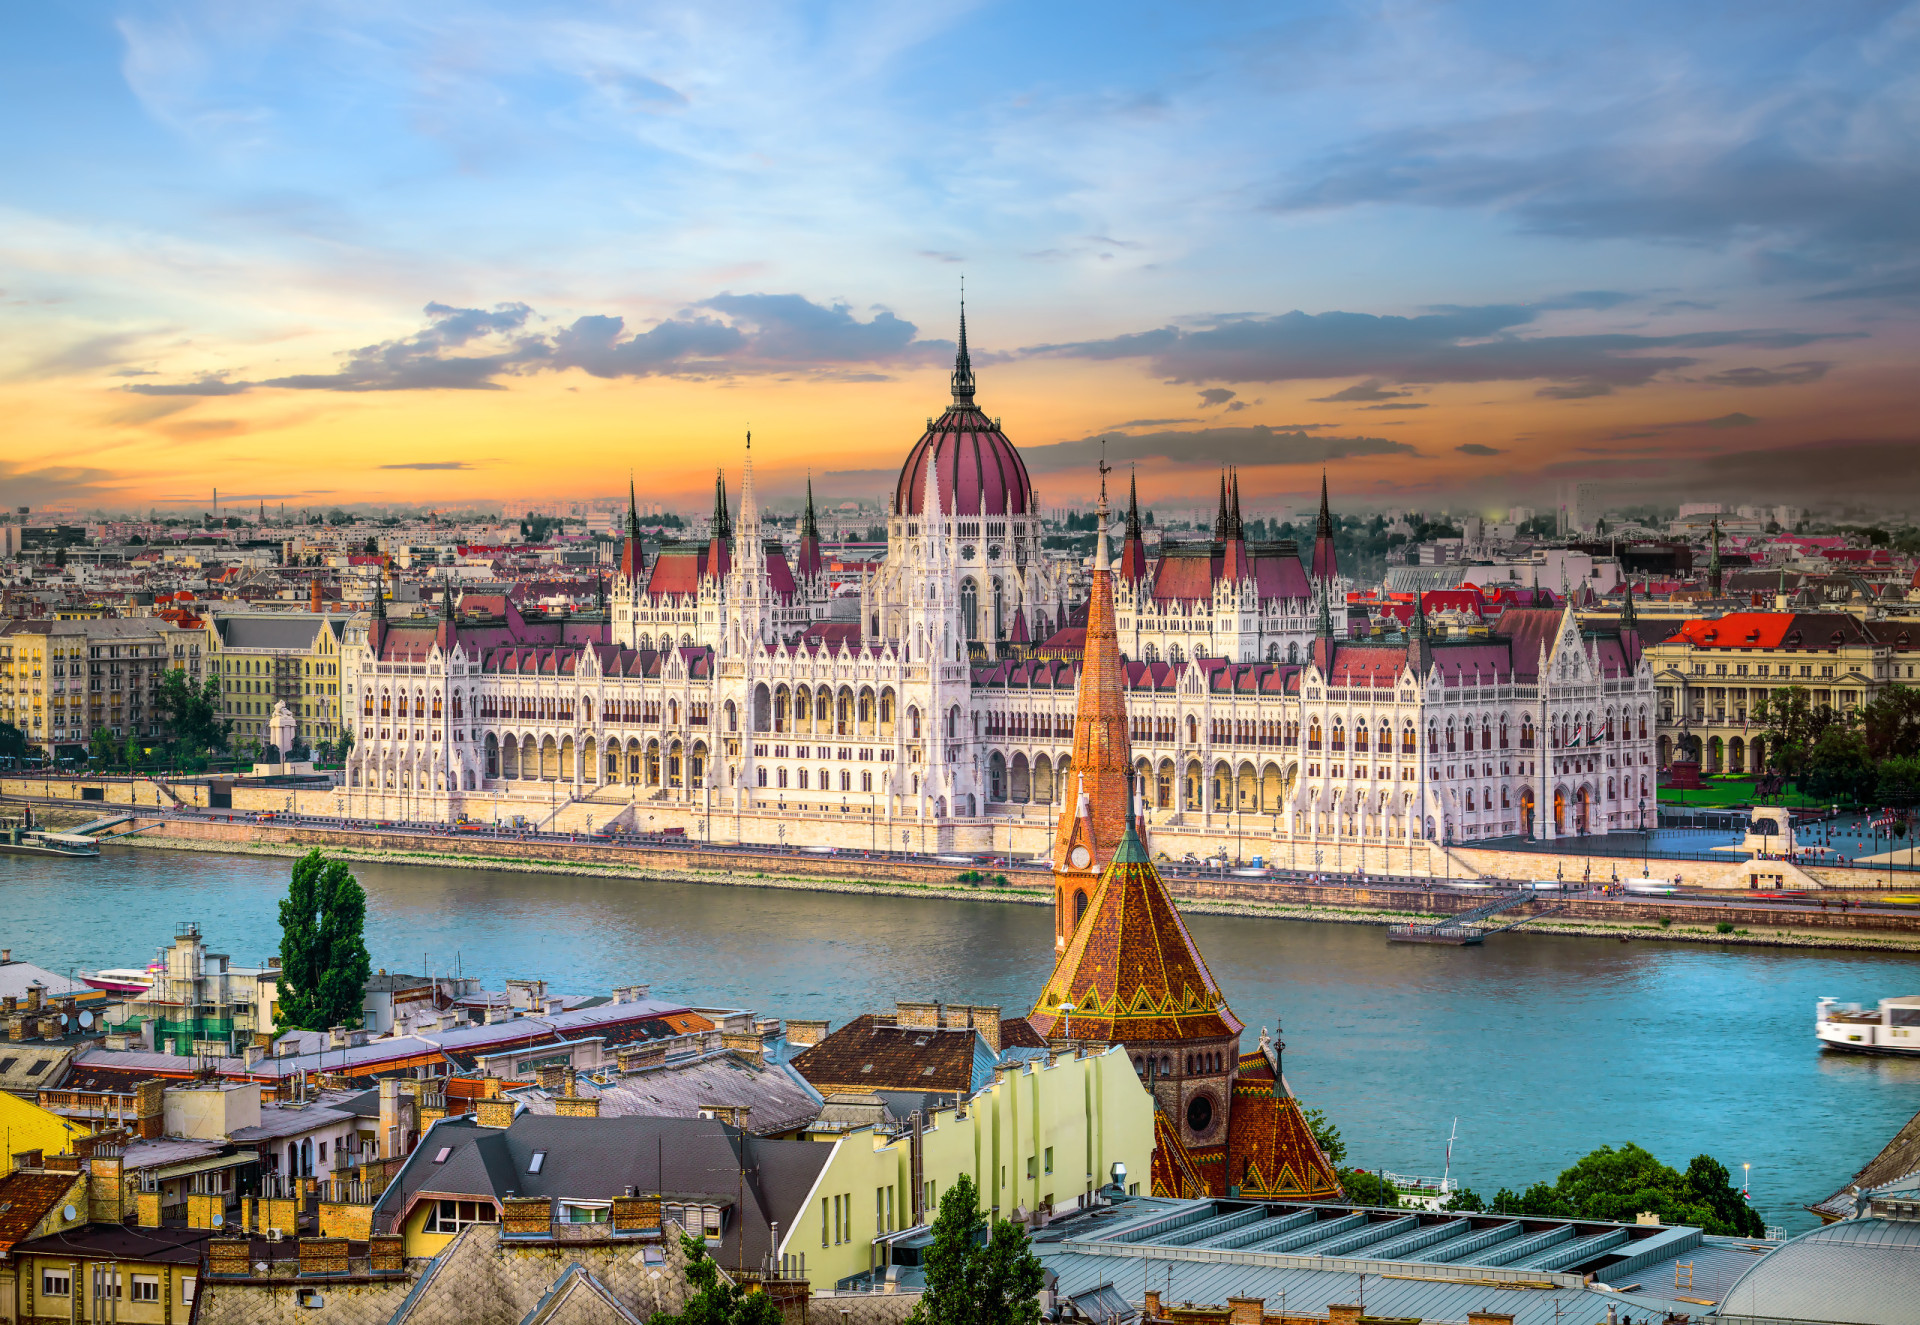 <p>Tourist tax in Hungary only applies in Budapest. Travelers have to pay an extra 4% nightly on the price of their room.</p><p>You may also like:<a href="https://www.starsinsider.com/n/276595?utm_source=msn.com&utm_medium=display&utm_campaign=referral_description&utm_content=683460en-ph"> Hollywood's hottest hairstyle: long and sleek!</a></p>